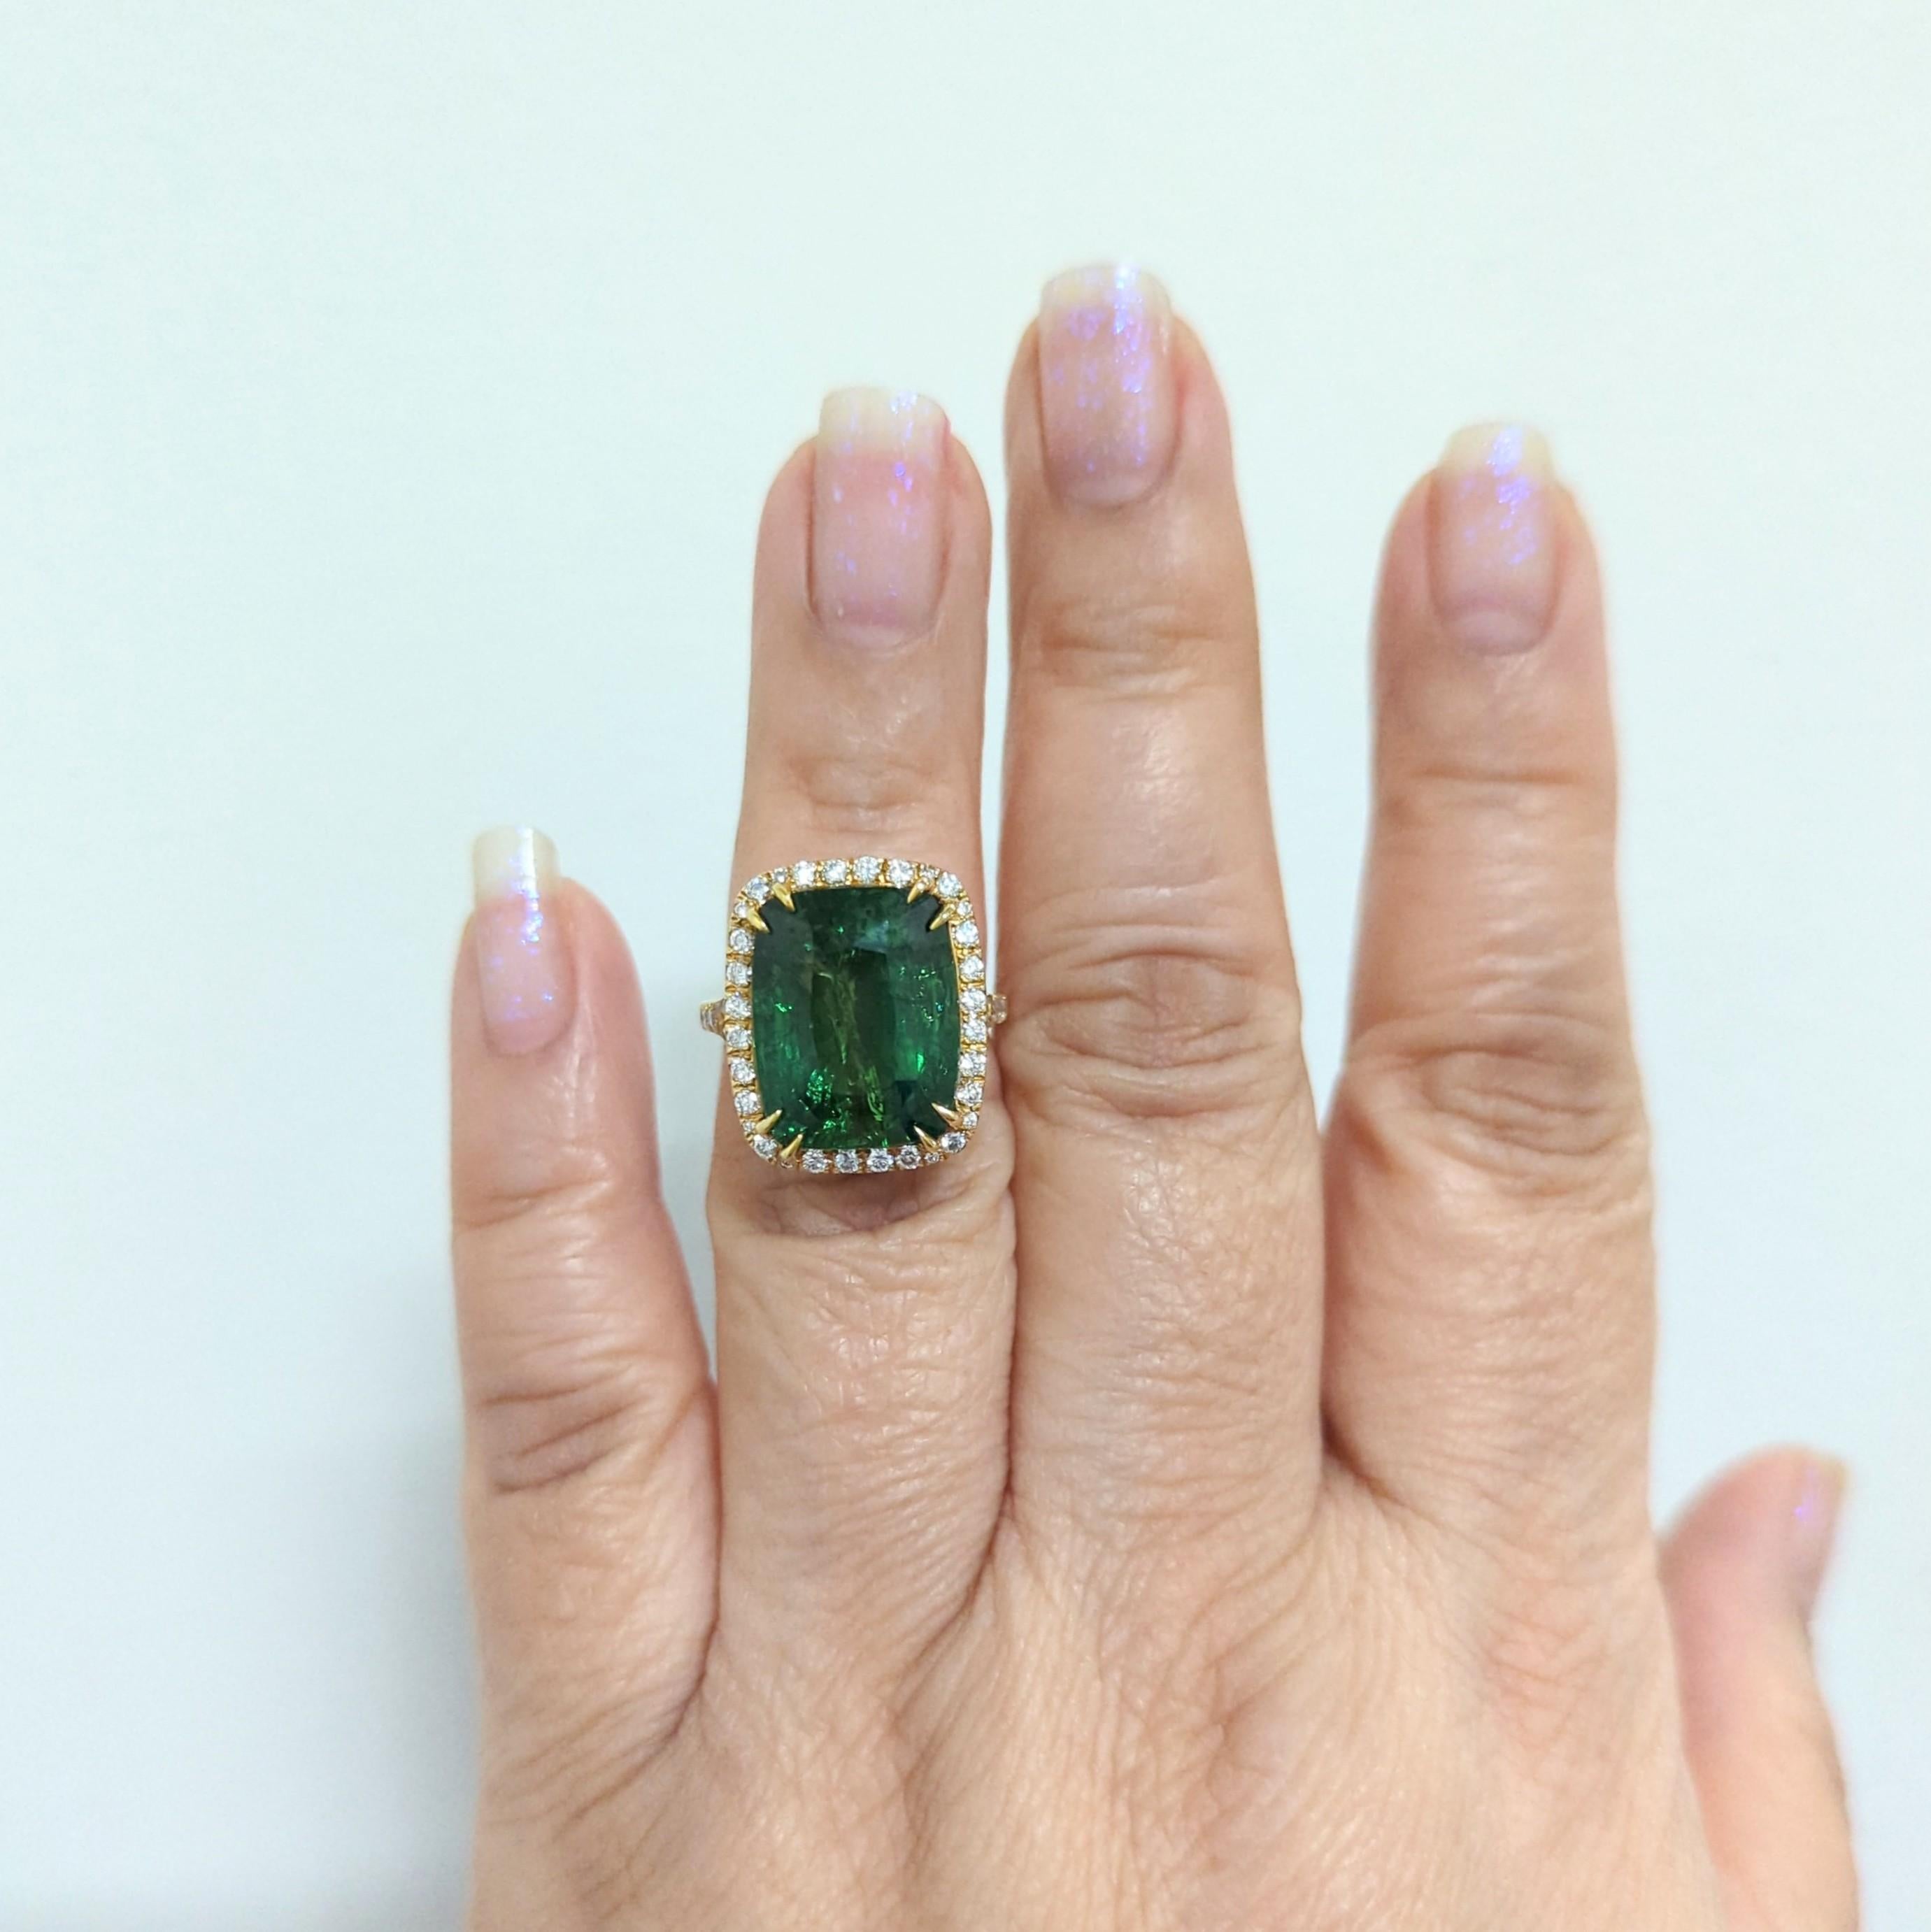 Gorgeous 15.50 carat green tsavorite cushion with 0.77 carats of diamond rounds in 18k yellow gold.  This beautiful cocktail ring is size 5.75 and perfect for any occasion.  A rich forest green hue that pops with the white diamond accents and yellow